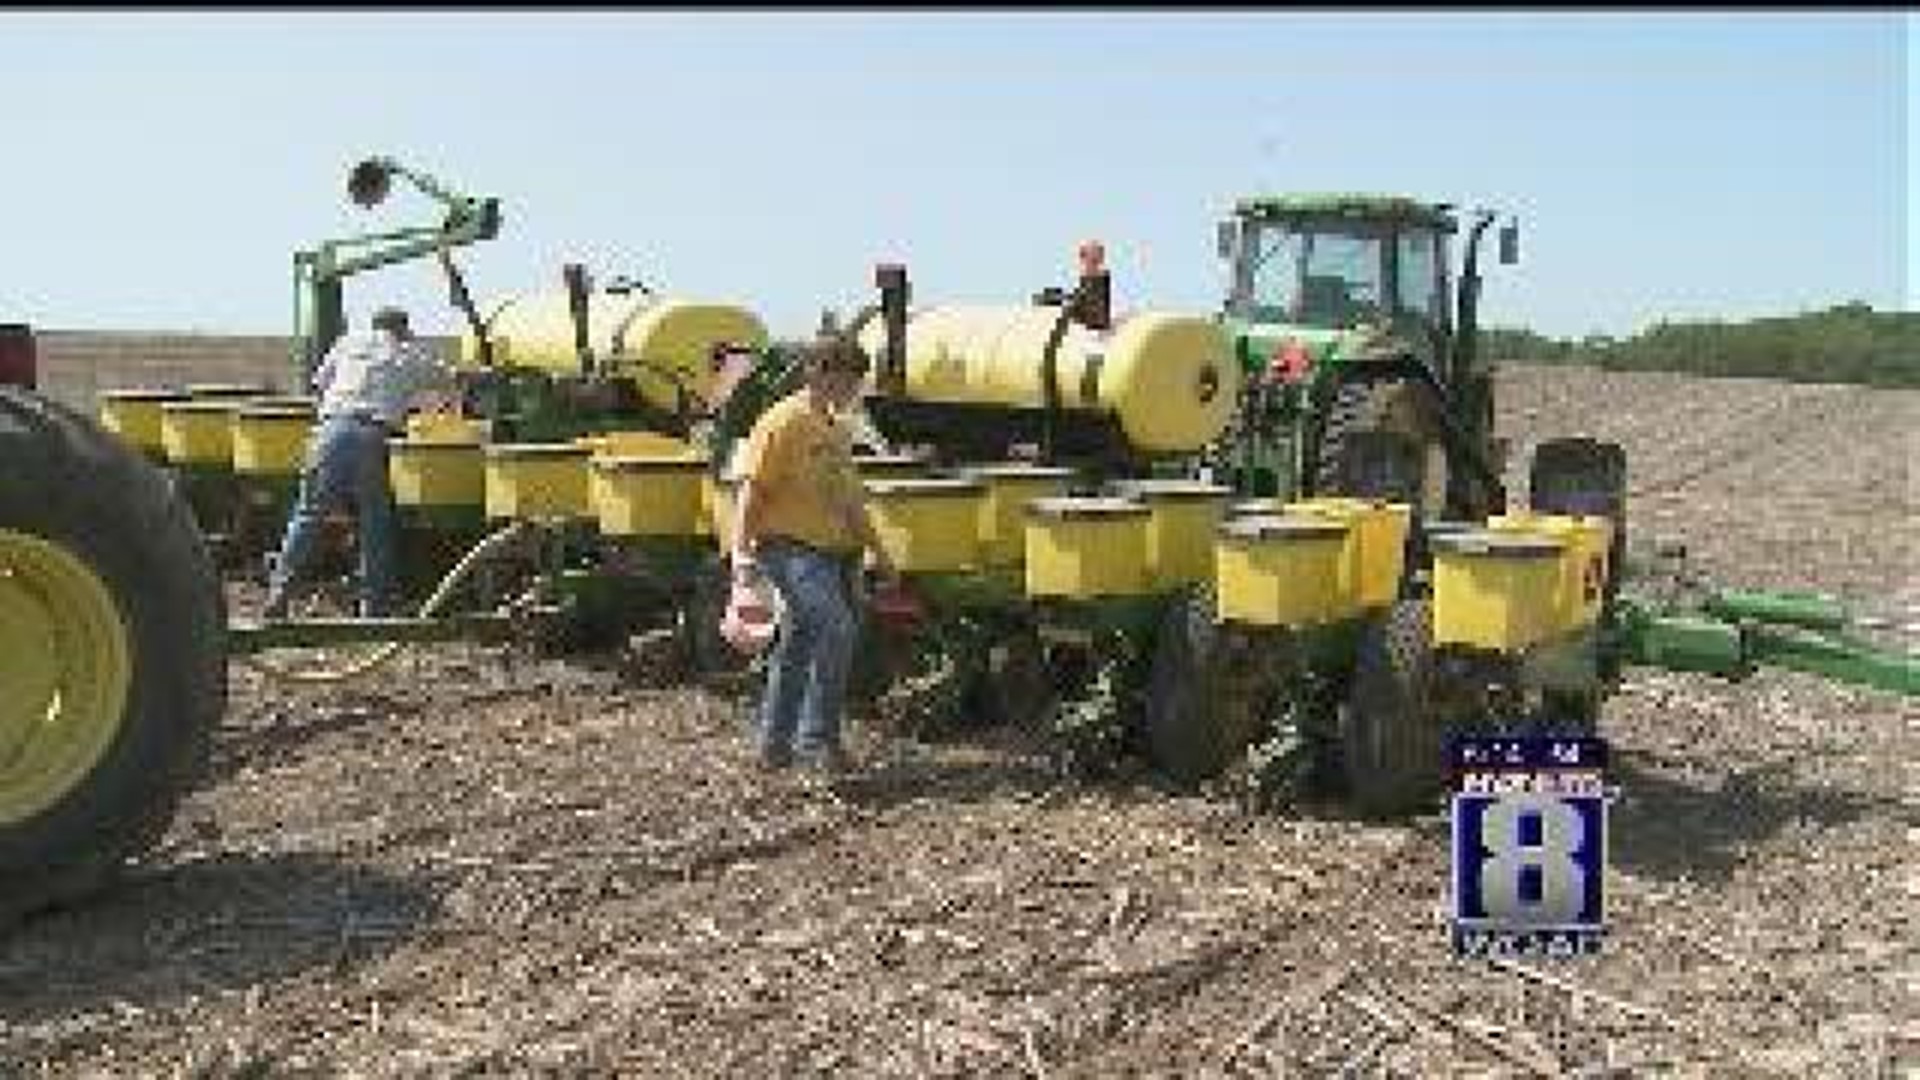 Ag in the AM: Future Farmers Want to Stay in Iowa